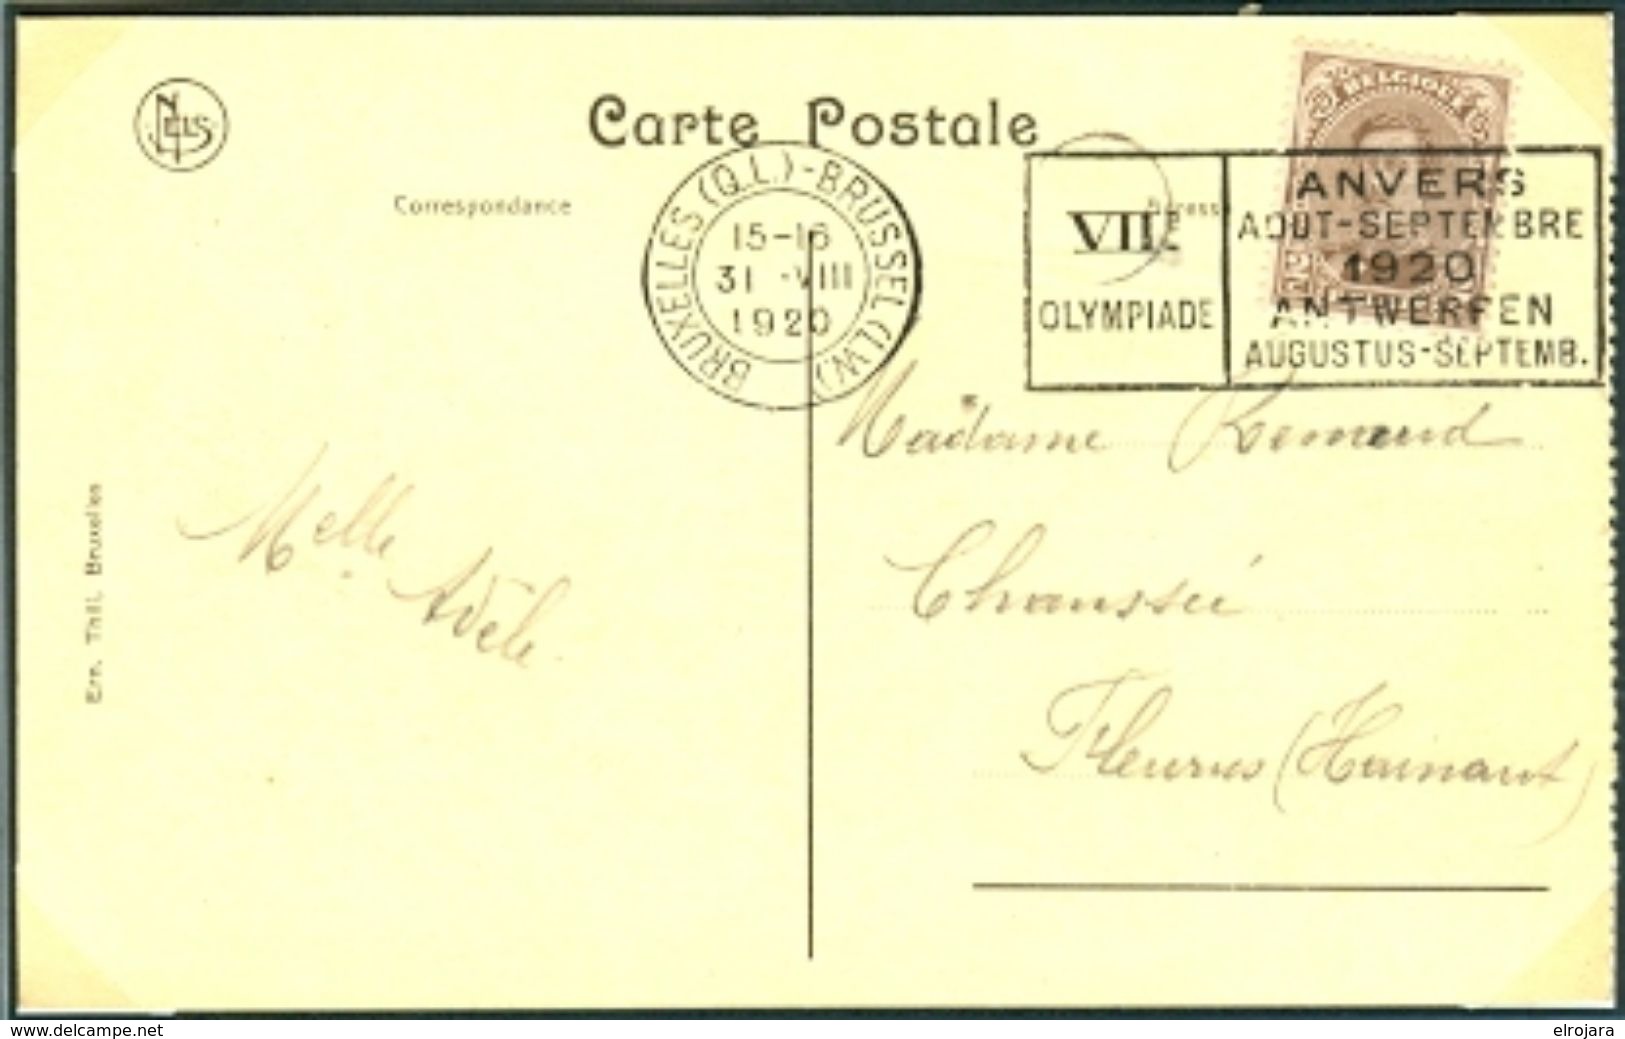 BELGIUM Postcard With Olympic Machine Cancel Bruxelles QL Brussel LW Dated 31-VIII 1920 Soccer Day - Estate 1920: Anversa